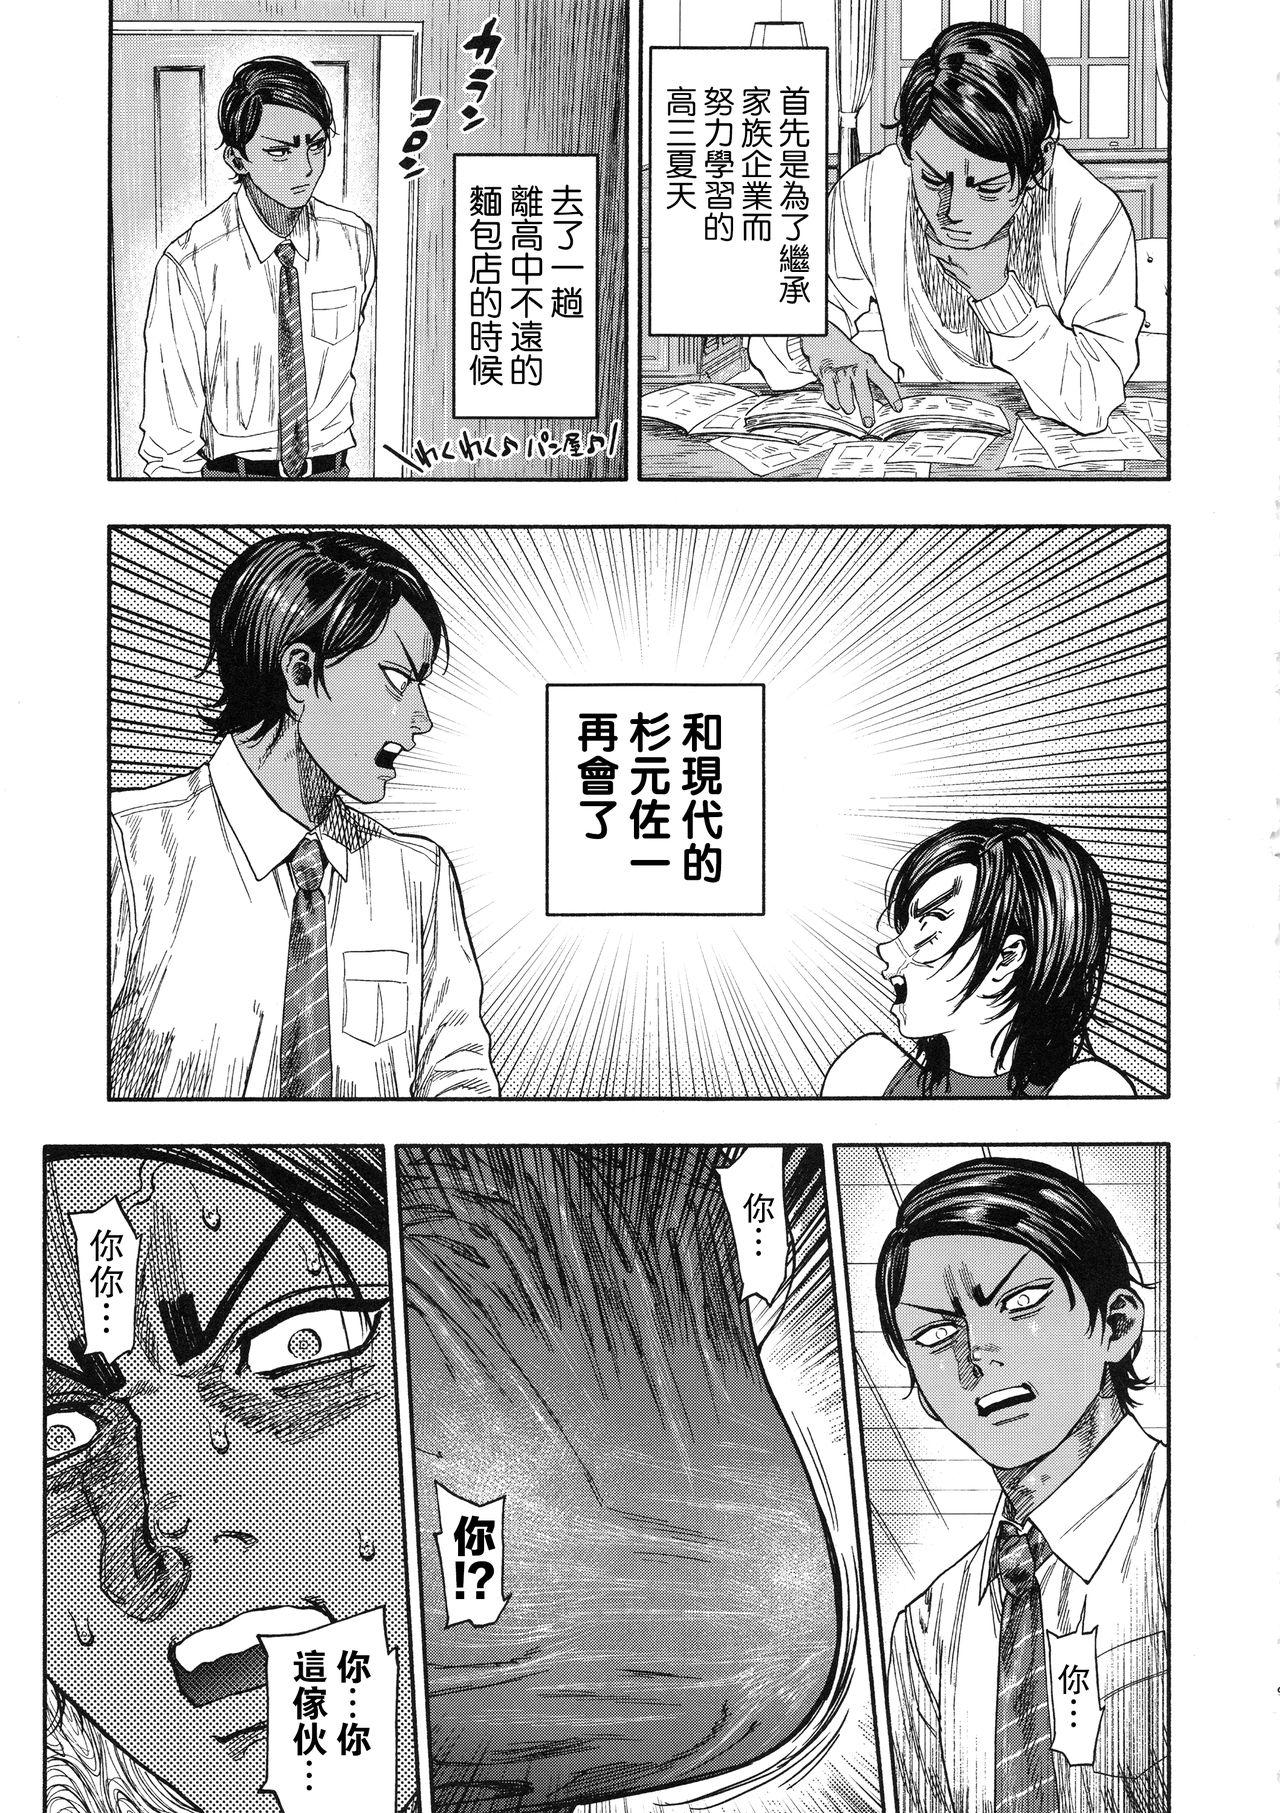 Prostitute Koisugi - Golden kamuy Gay Cut - Page 9